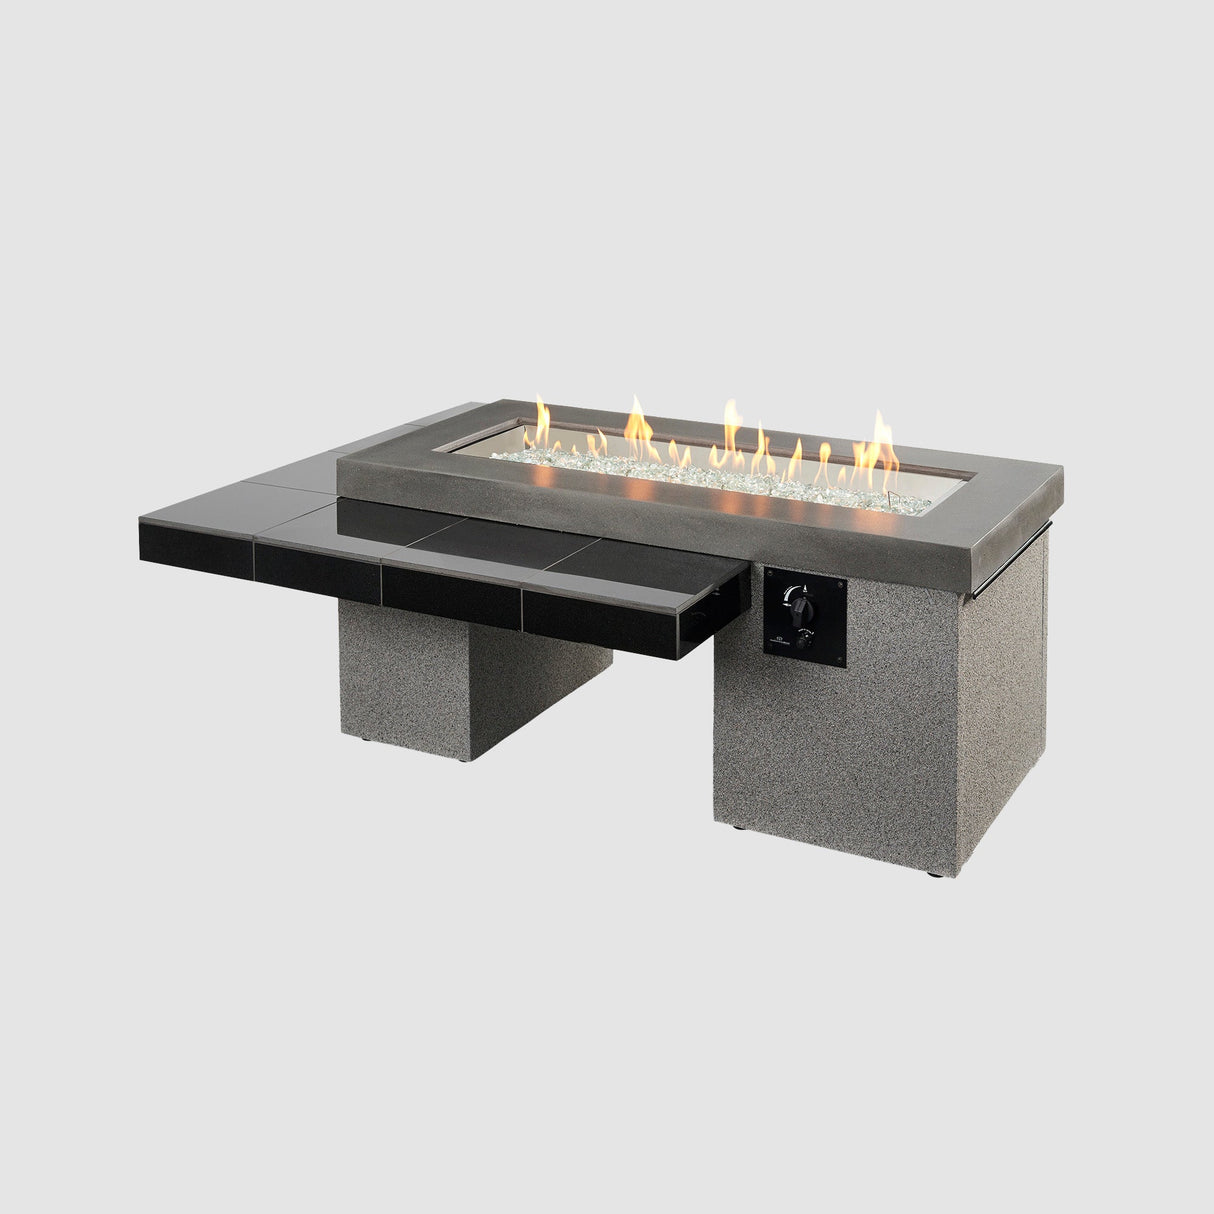 Black Uptown Linear Gas Fire Pit Table on a grey background